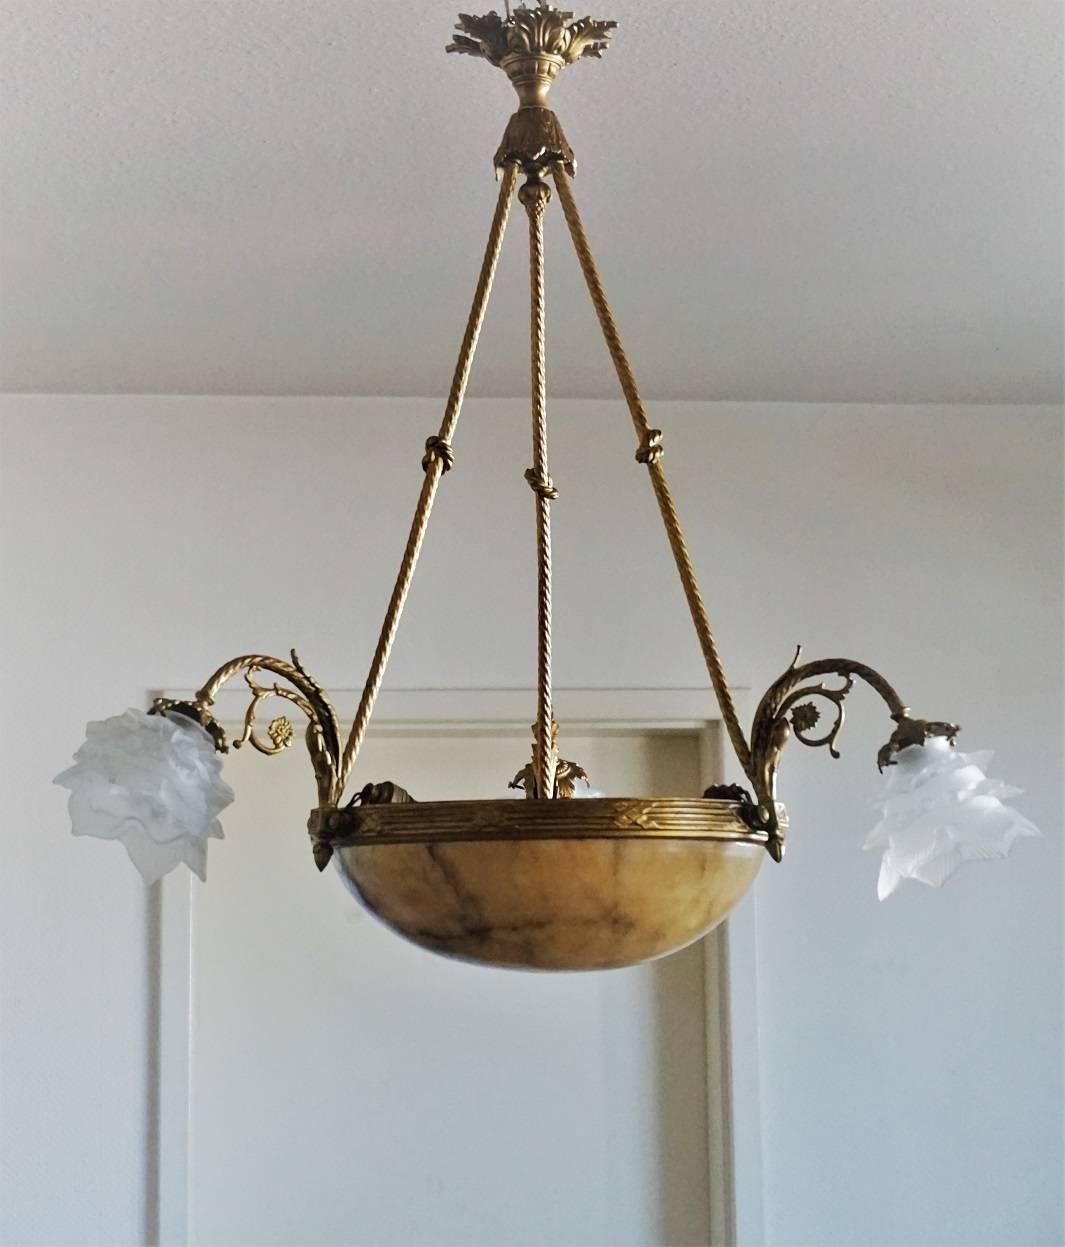 Large Art Deco solid gilt bronze chandelier with alabaster bowl shade suspended from three gilt bronze arms with knotted rope shape. Three curved arms with frosted glass flower shades, France, early 20th century. This beautiful chandelier is in fine